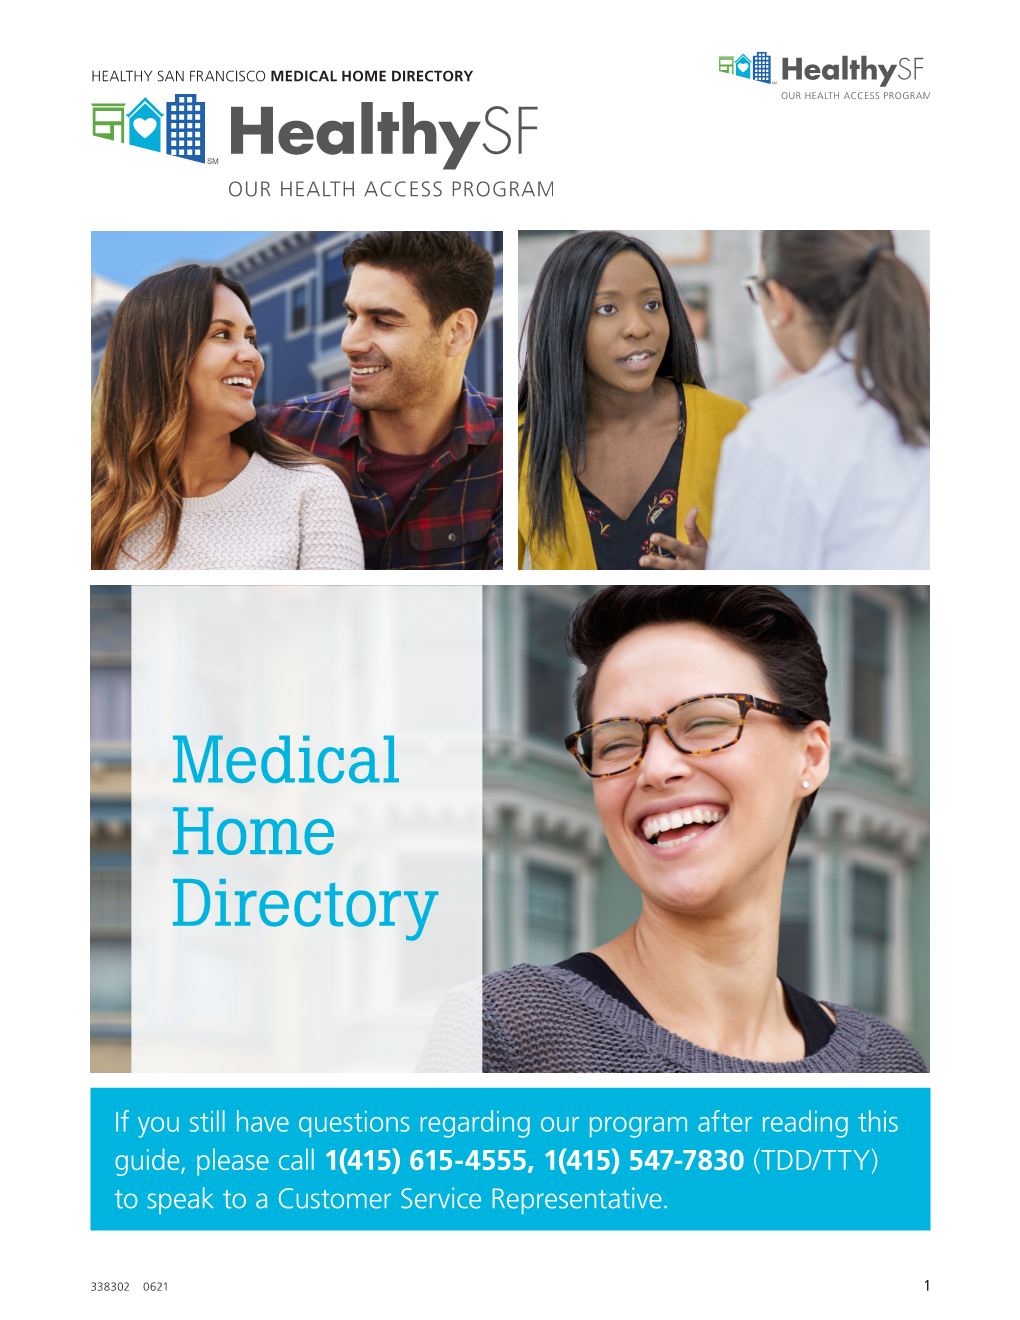 Medical Home Directory